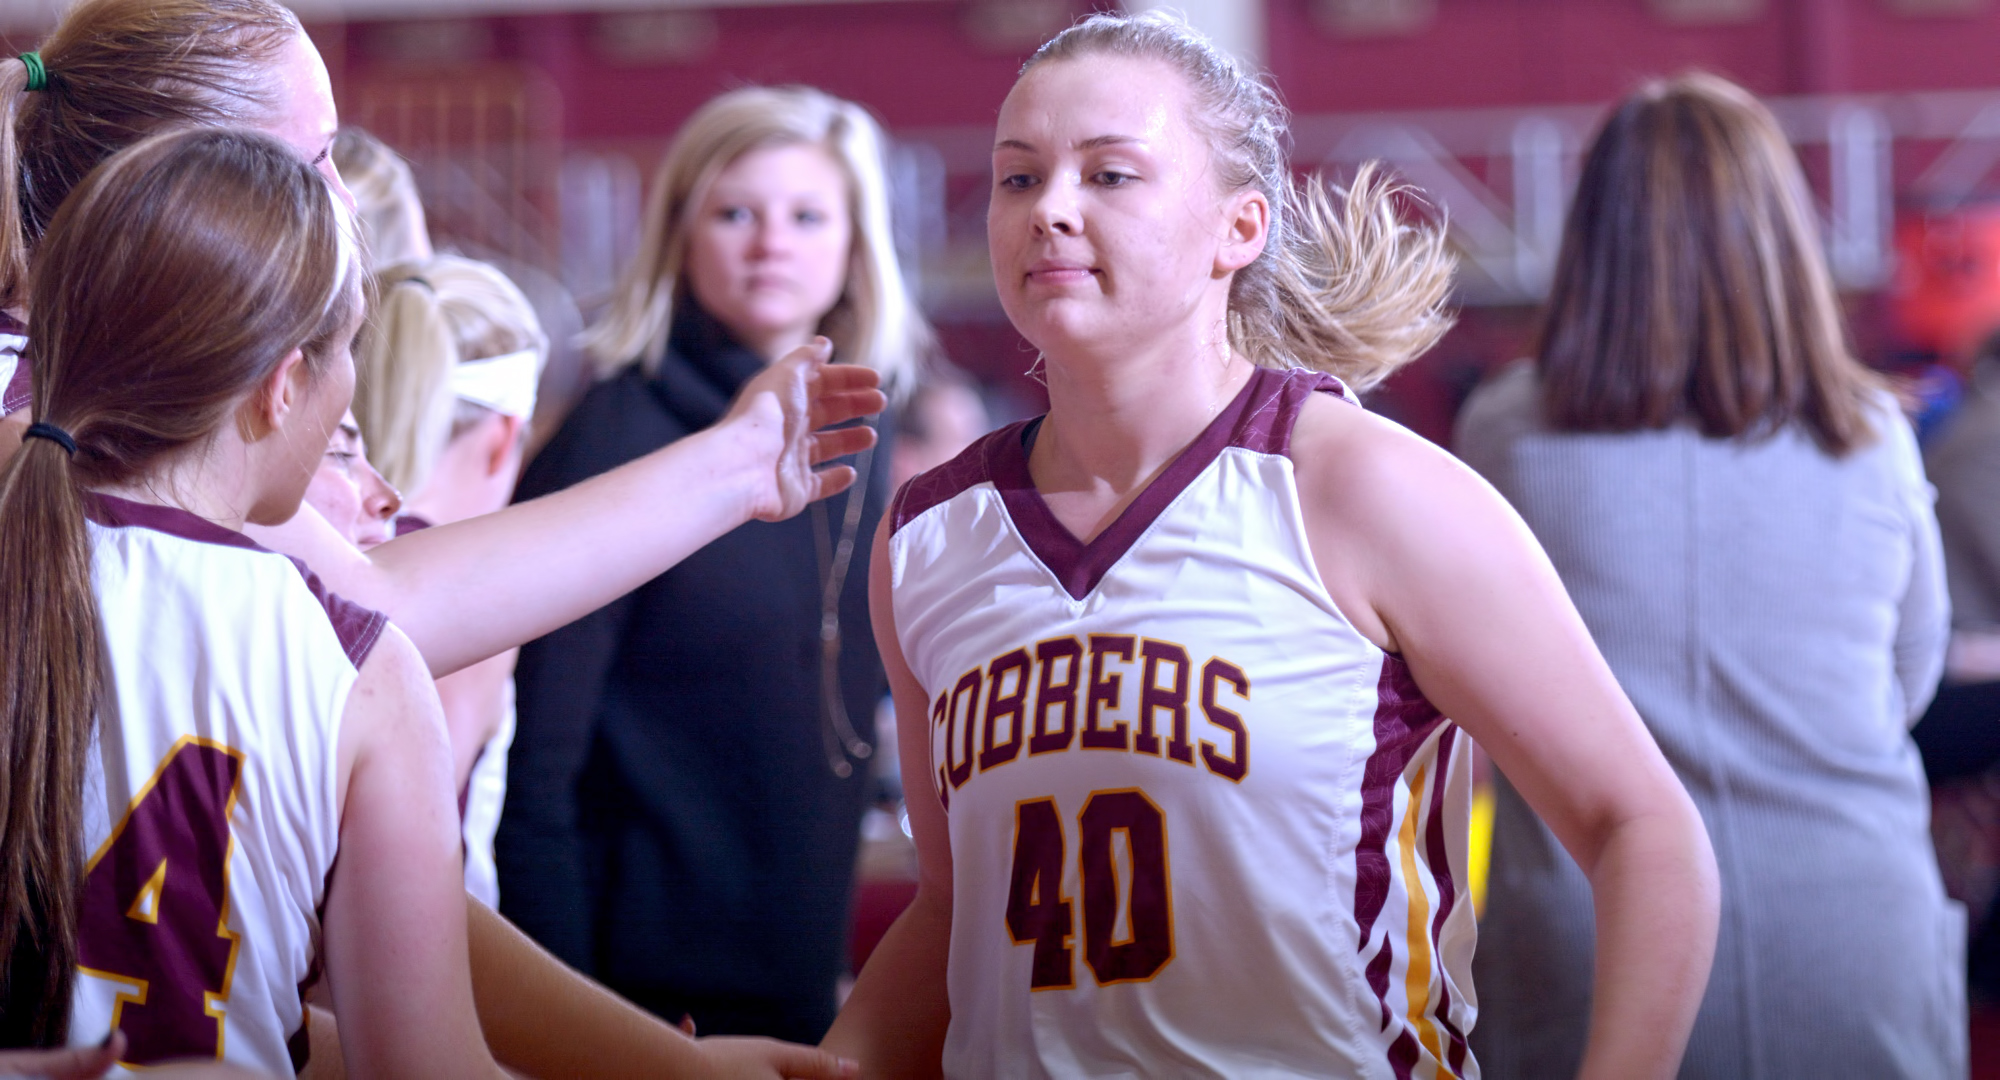 Sophomore Mira Ellefson scored a career-high 17 points in the Cobbers' non-conference game at Wis.-River Falls.